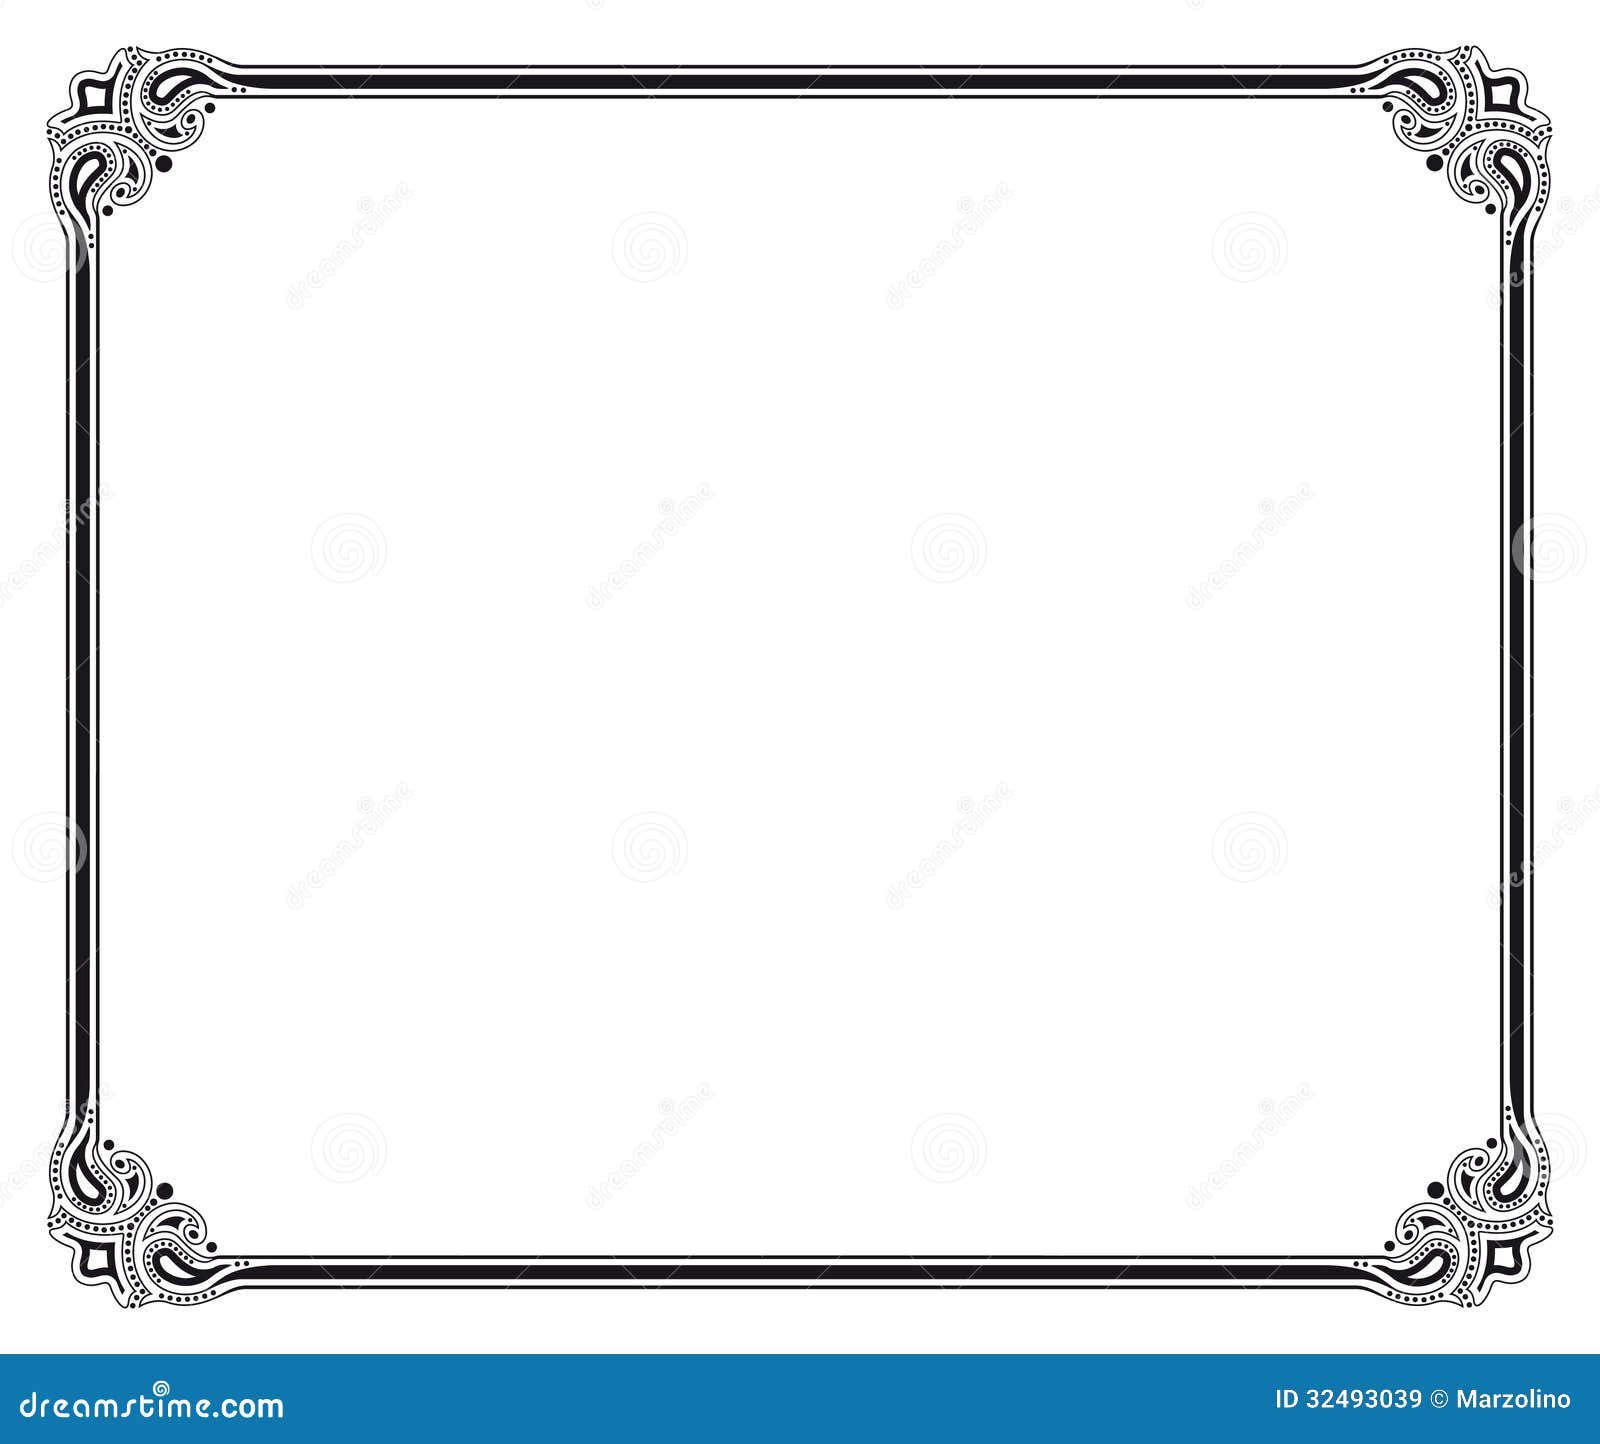 Vector Frame Royalty Free Stock Images - Image: 32493039